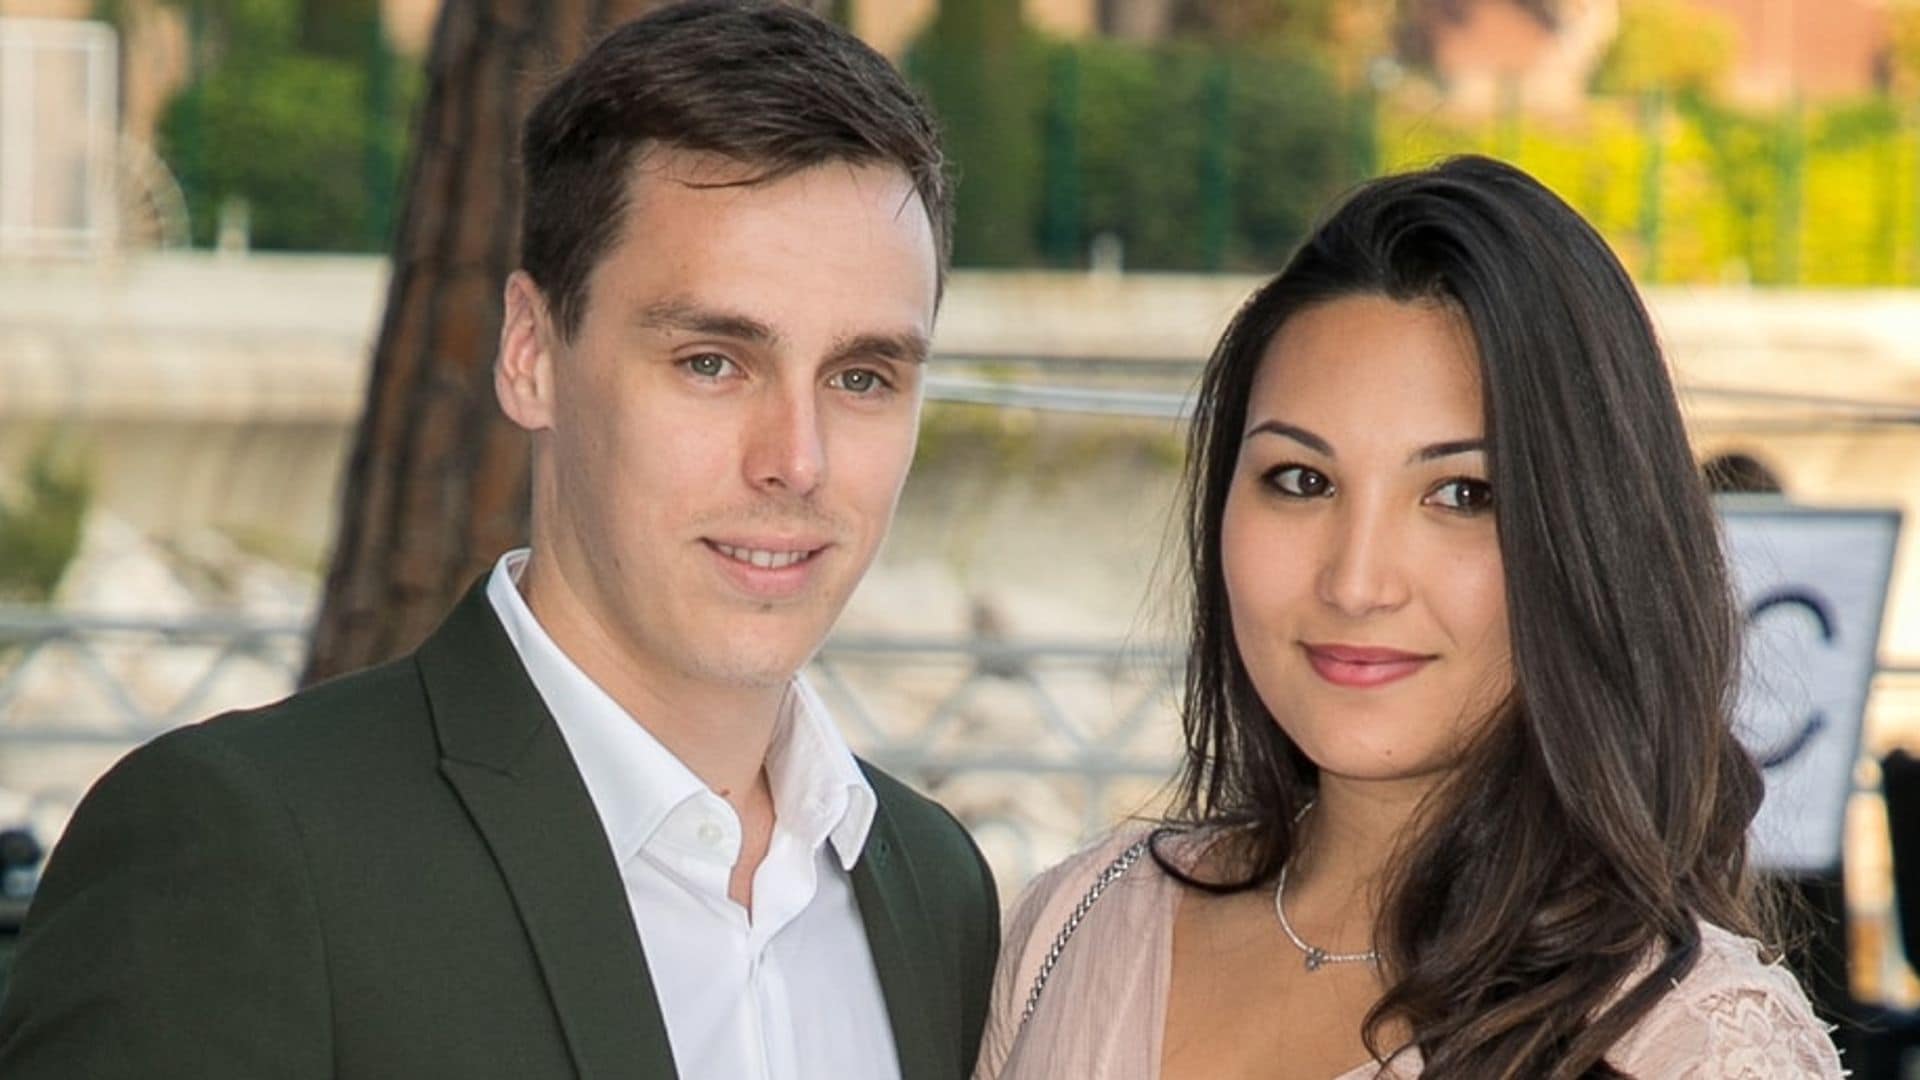 Grace Kelly's grandson Louis Ducruet and Marie Chevallier to marry July 27